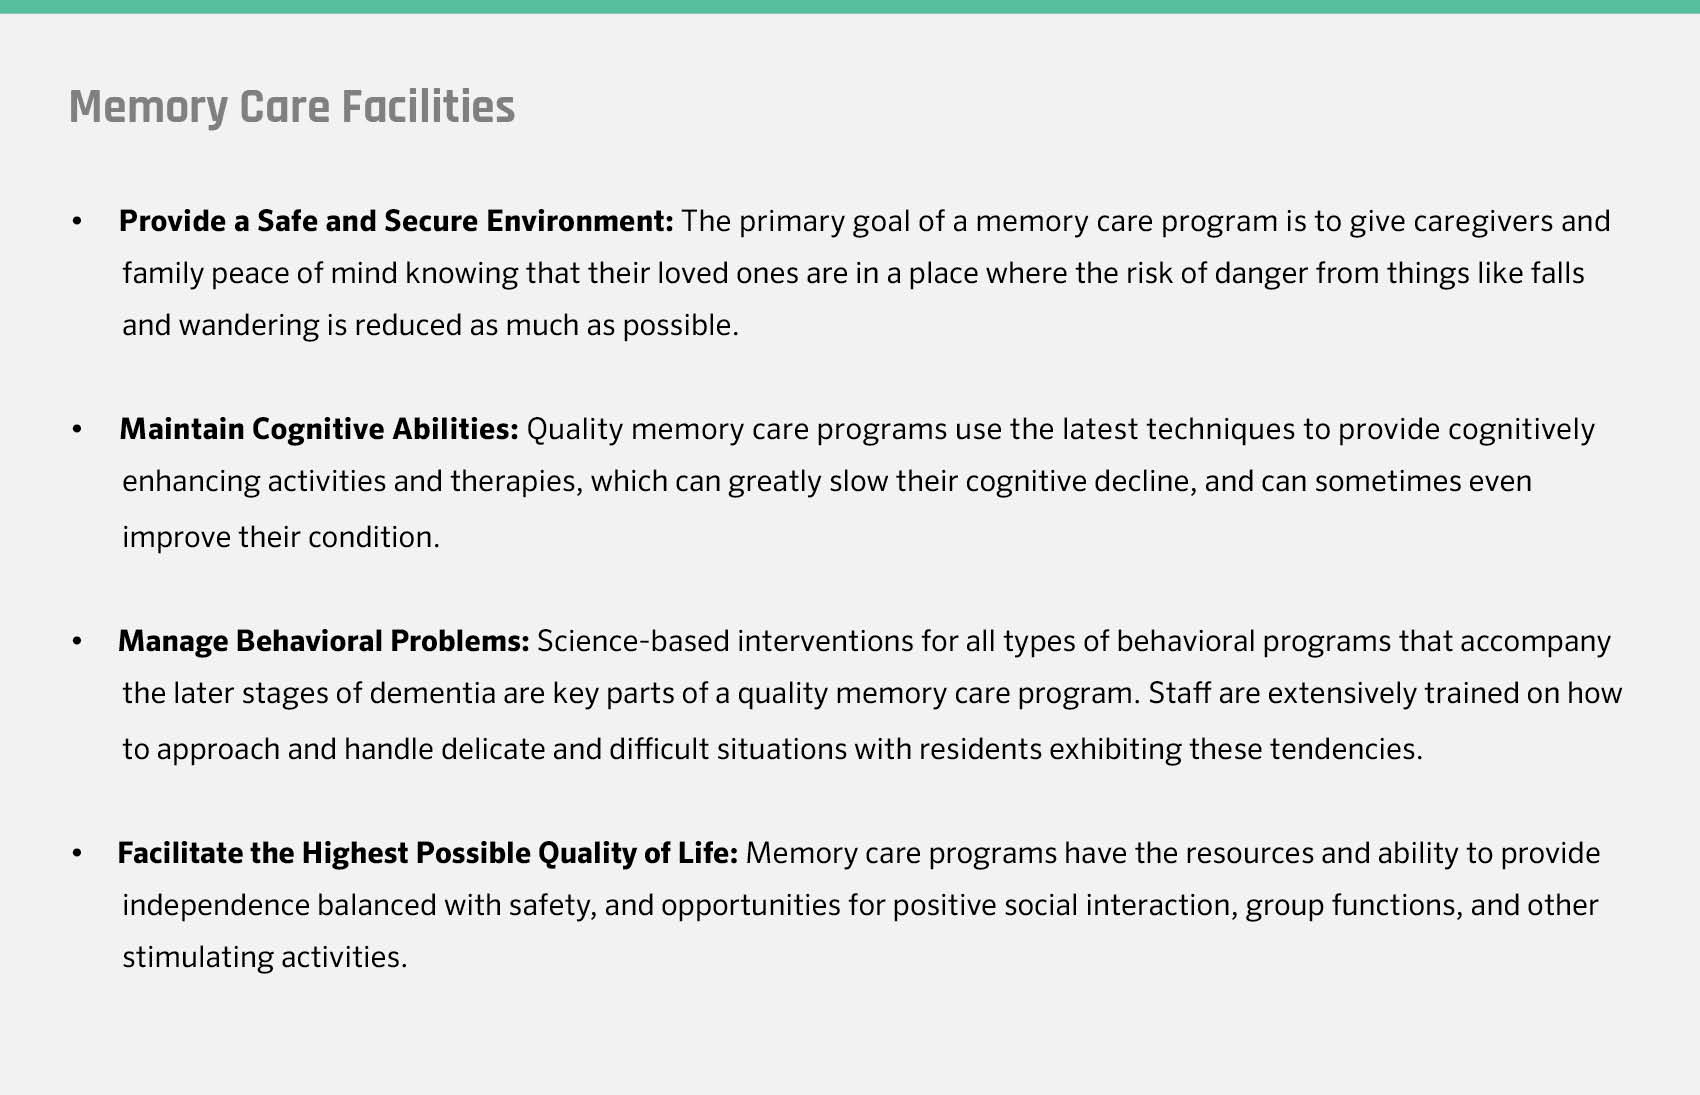 Overview of what memory care facilities provide